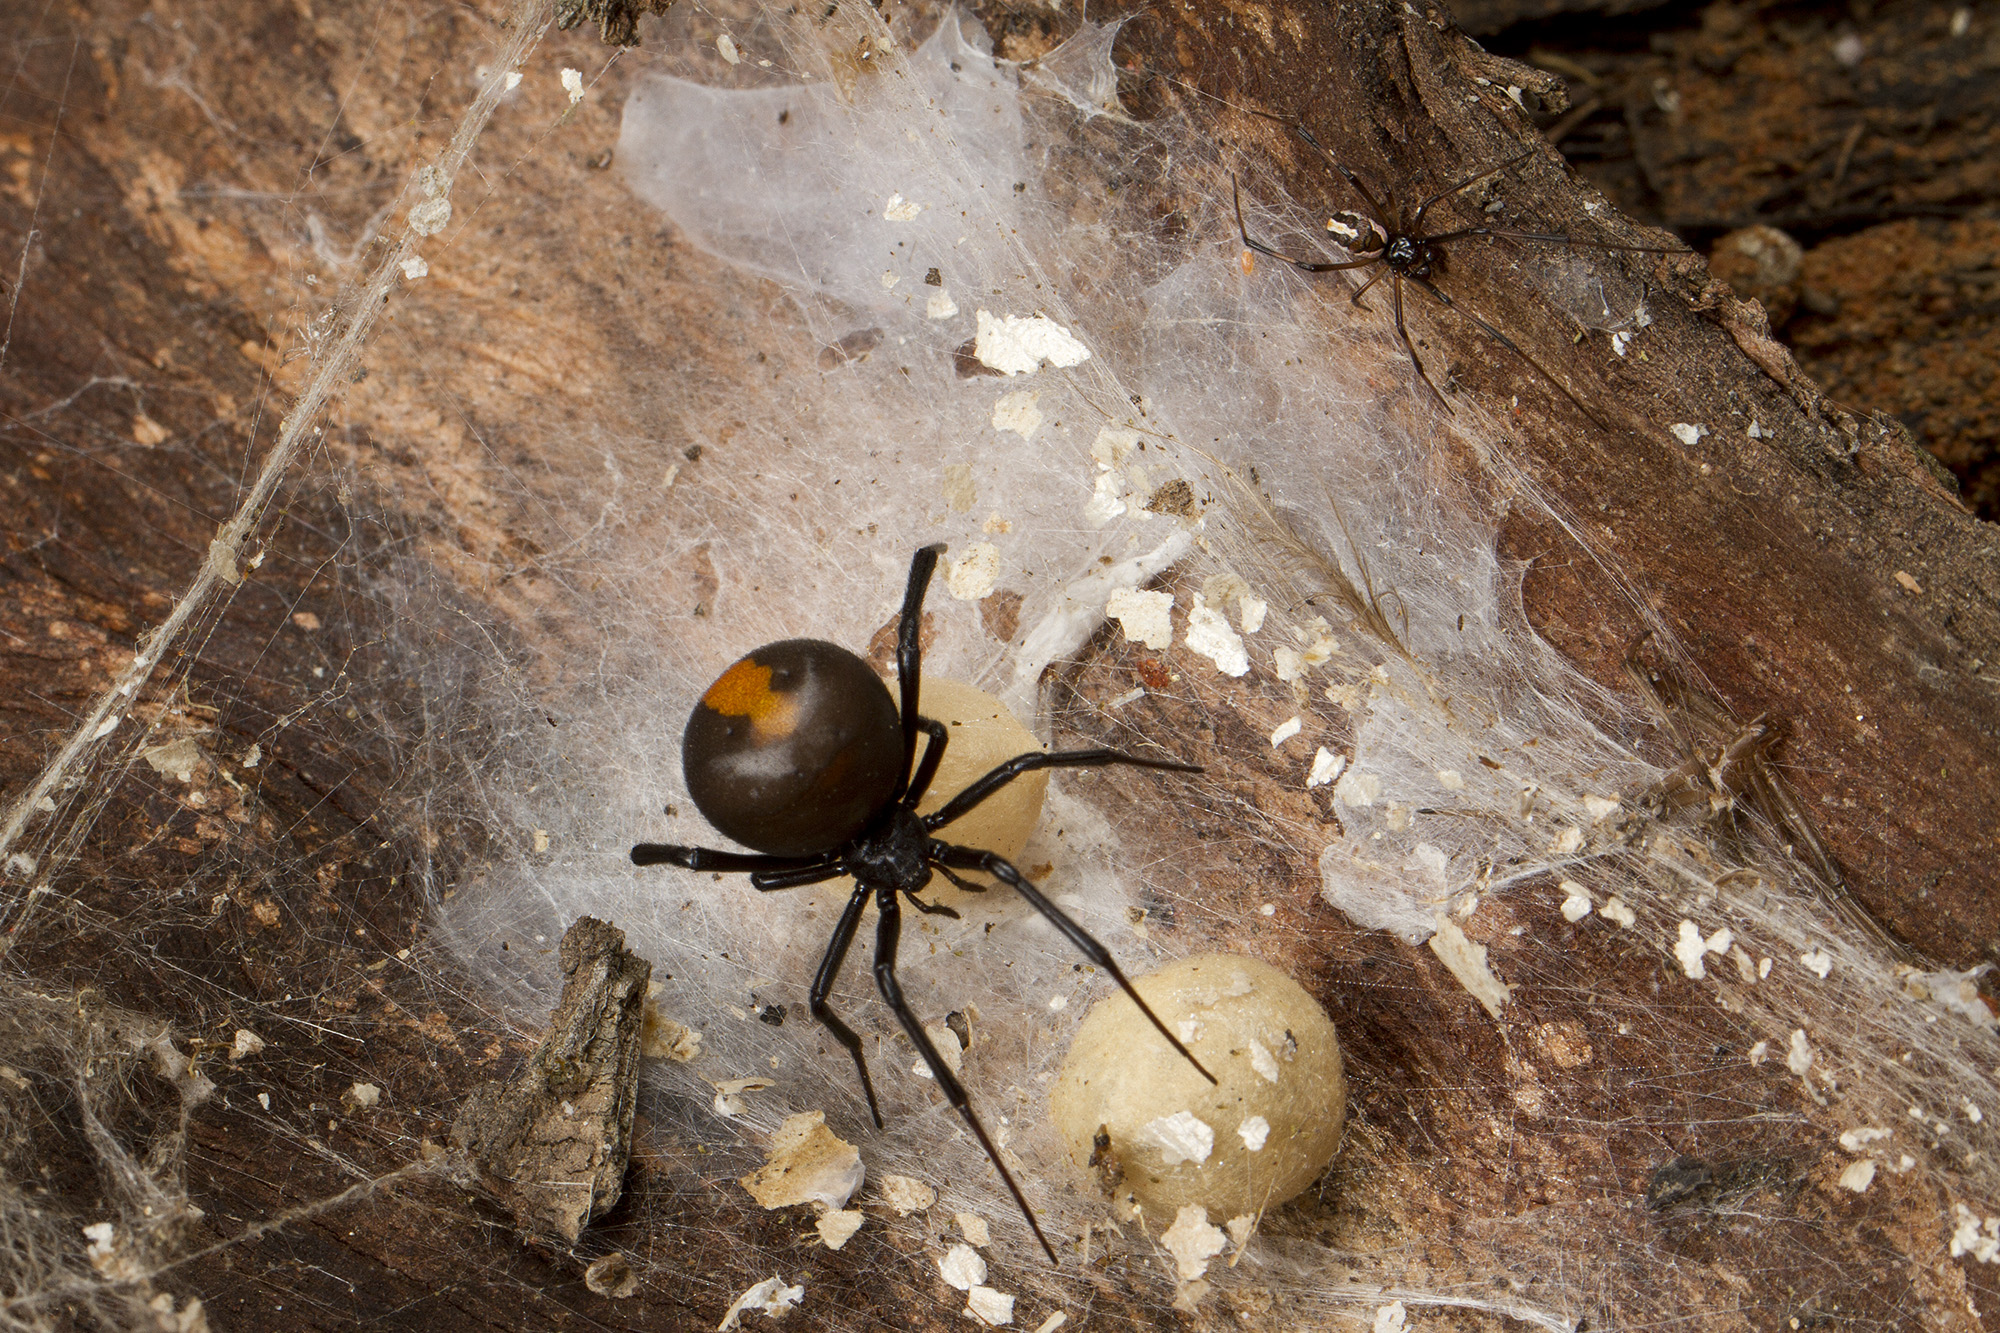 Top spider myths - Museums Victoria